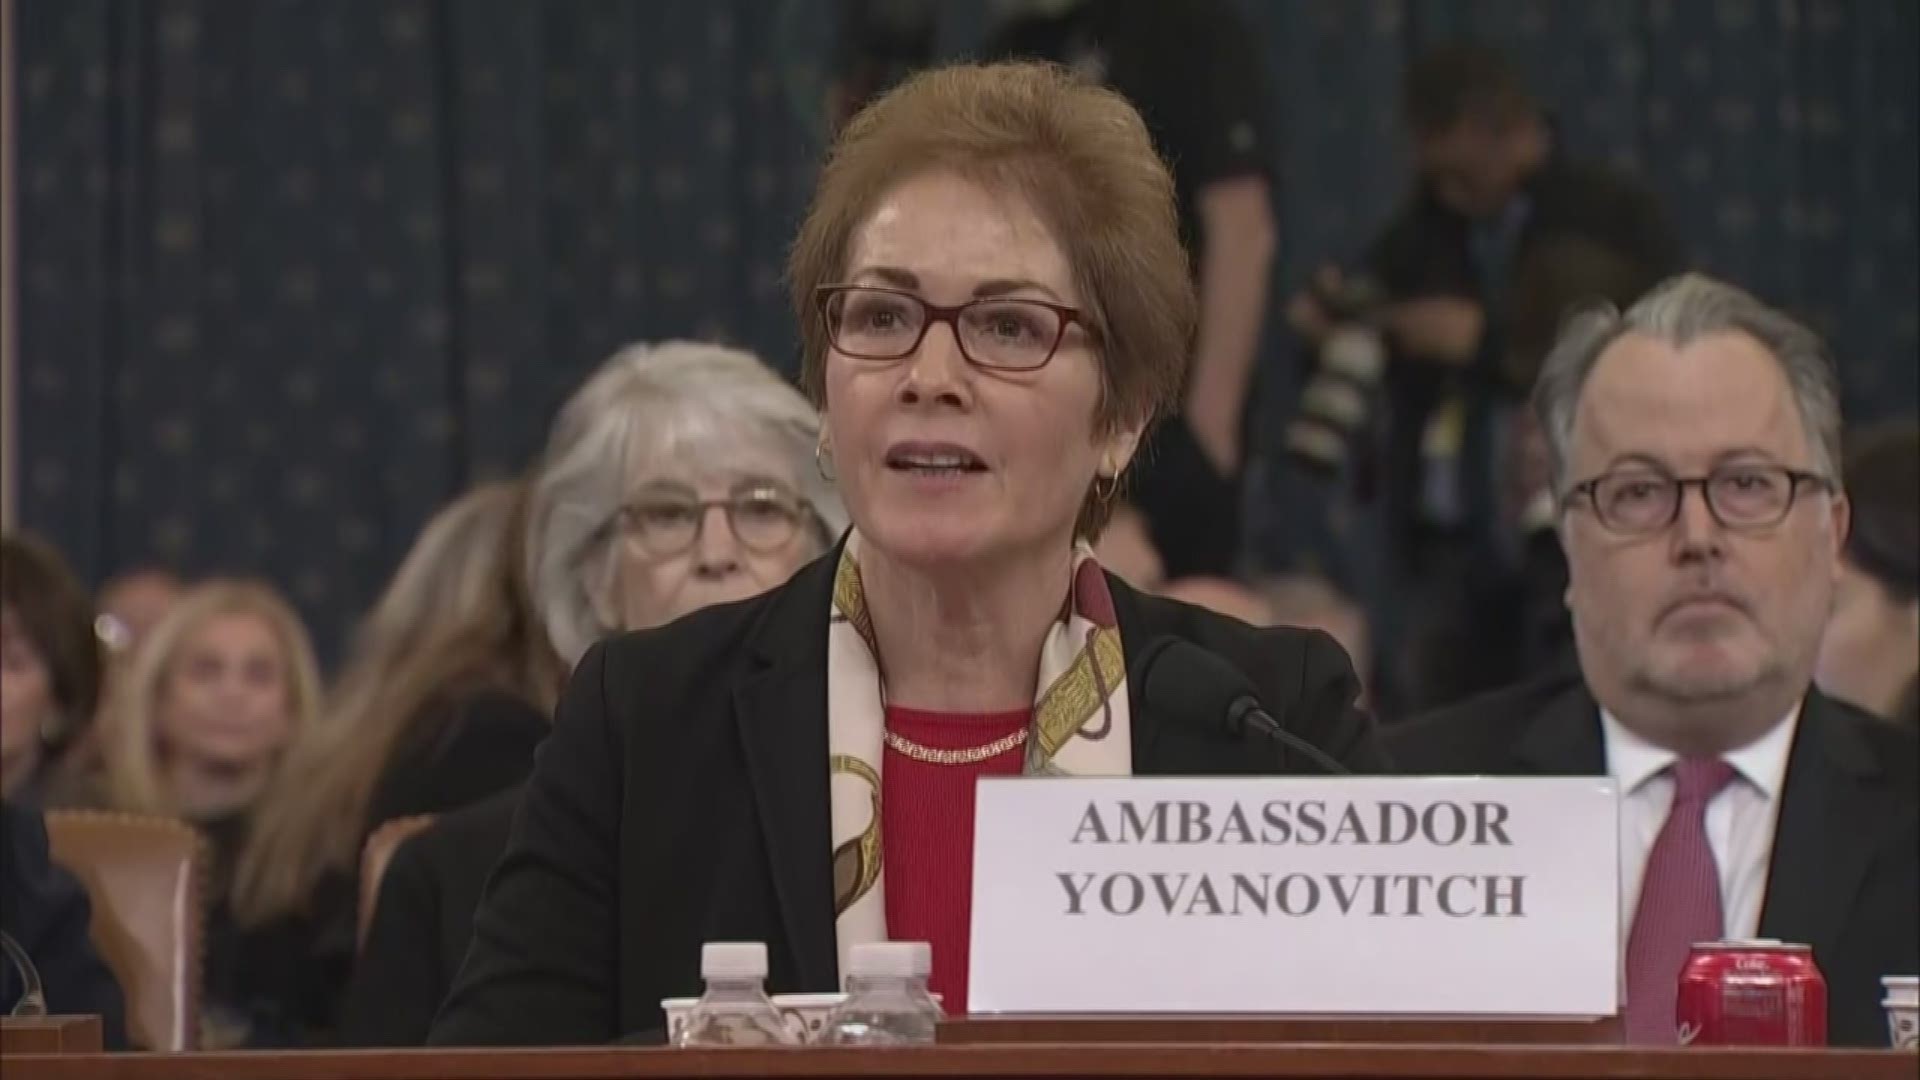 Marie Yovanovich has told Congress that attacks from corrupt interests have created a crisis at the State department.